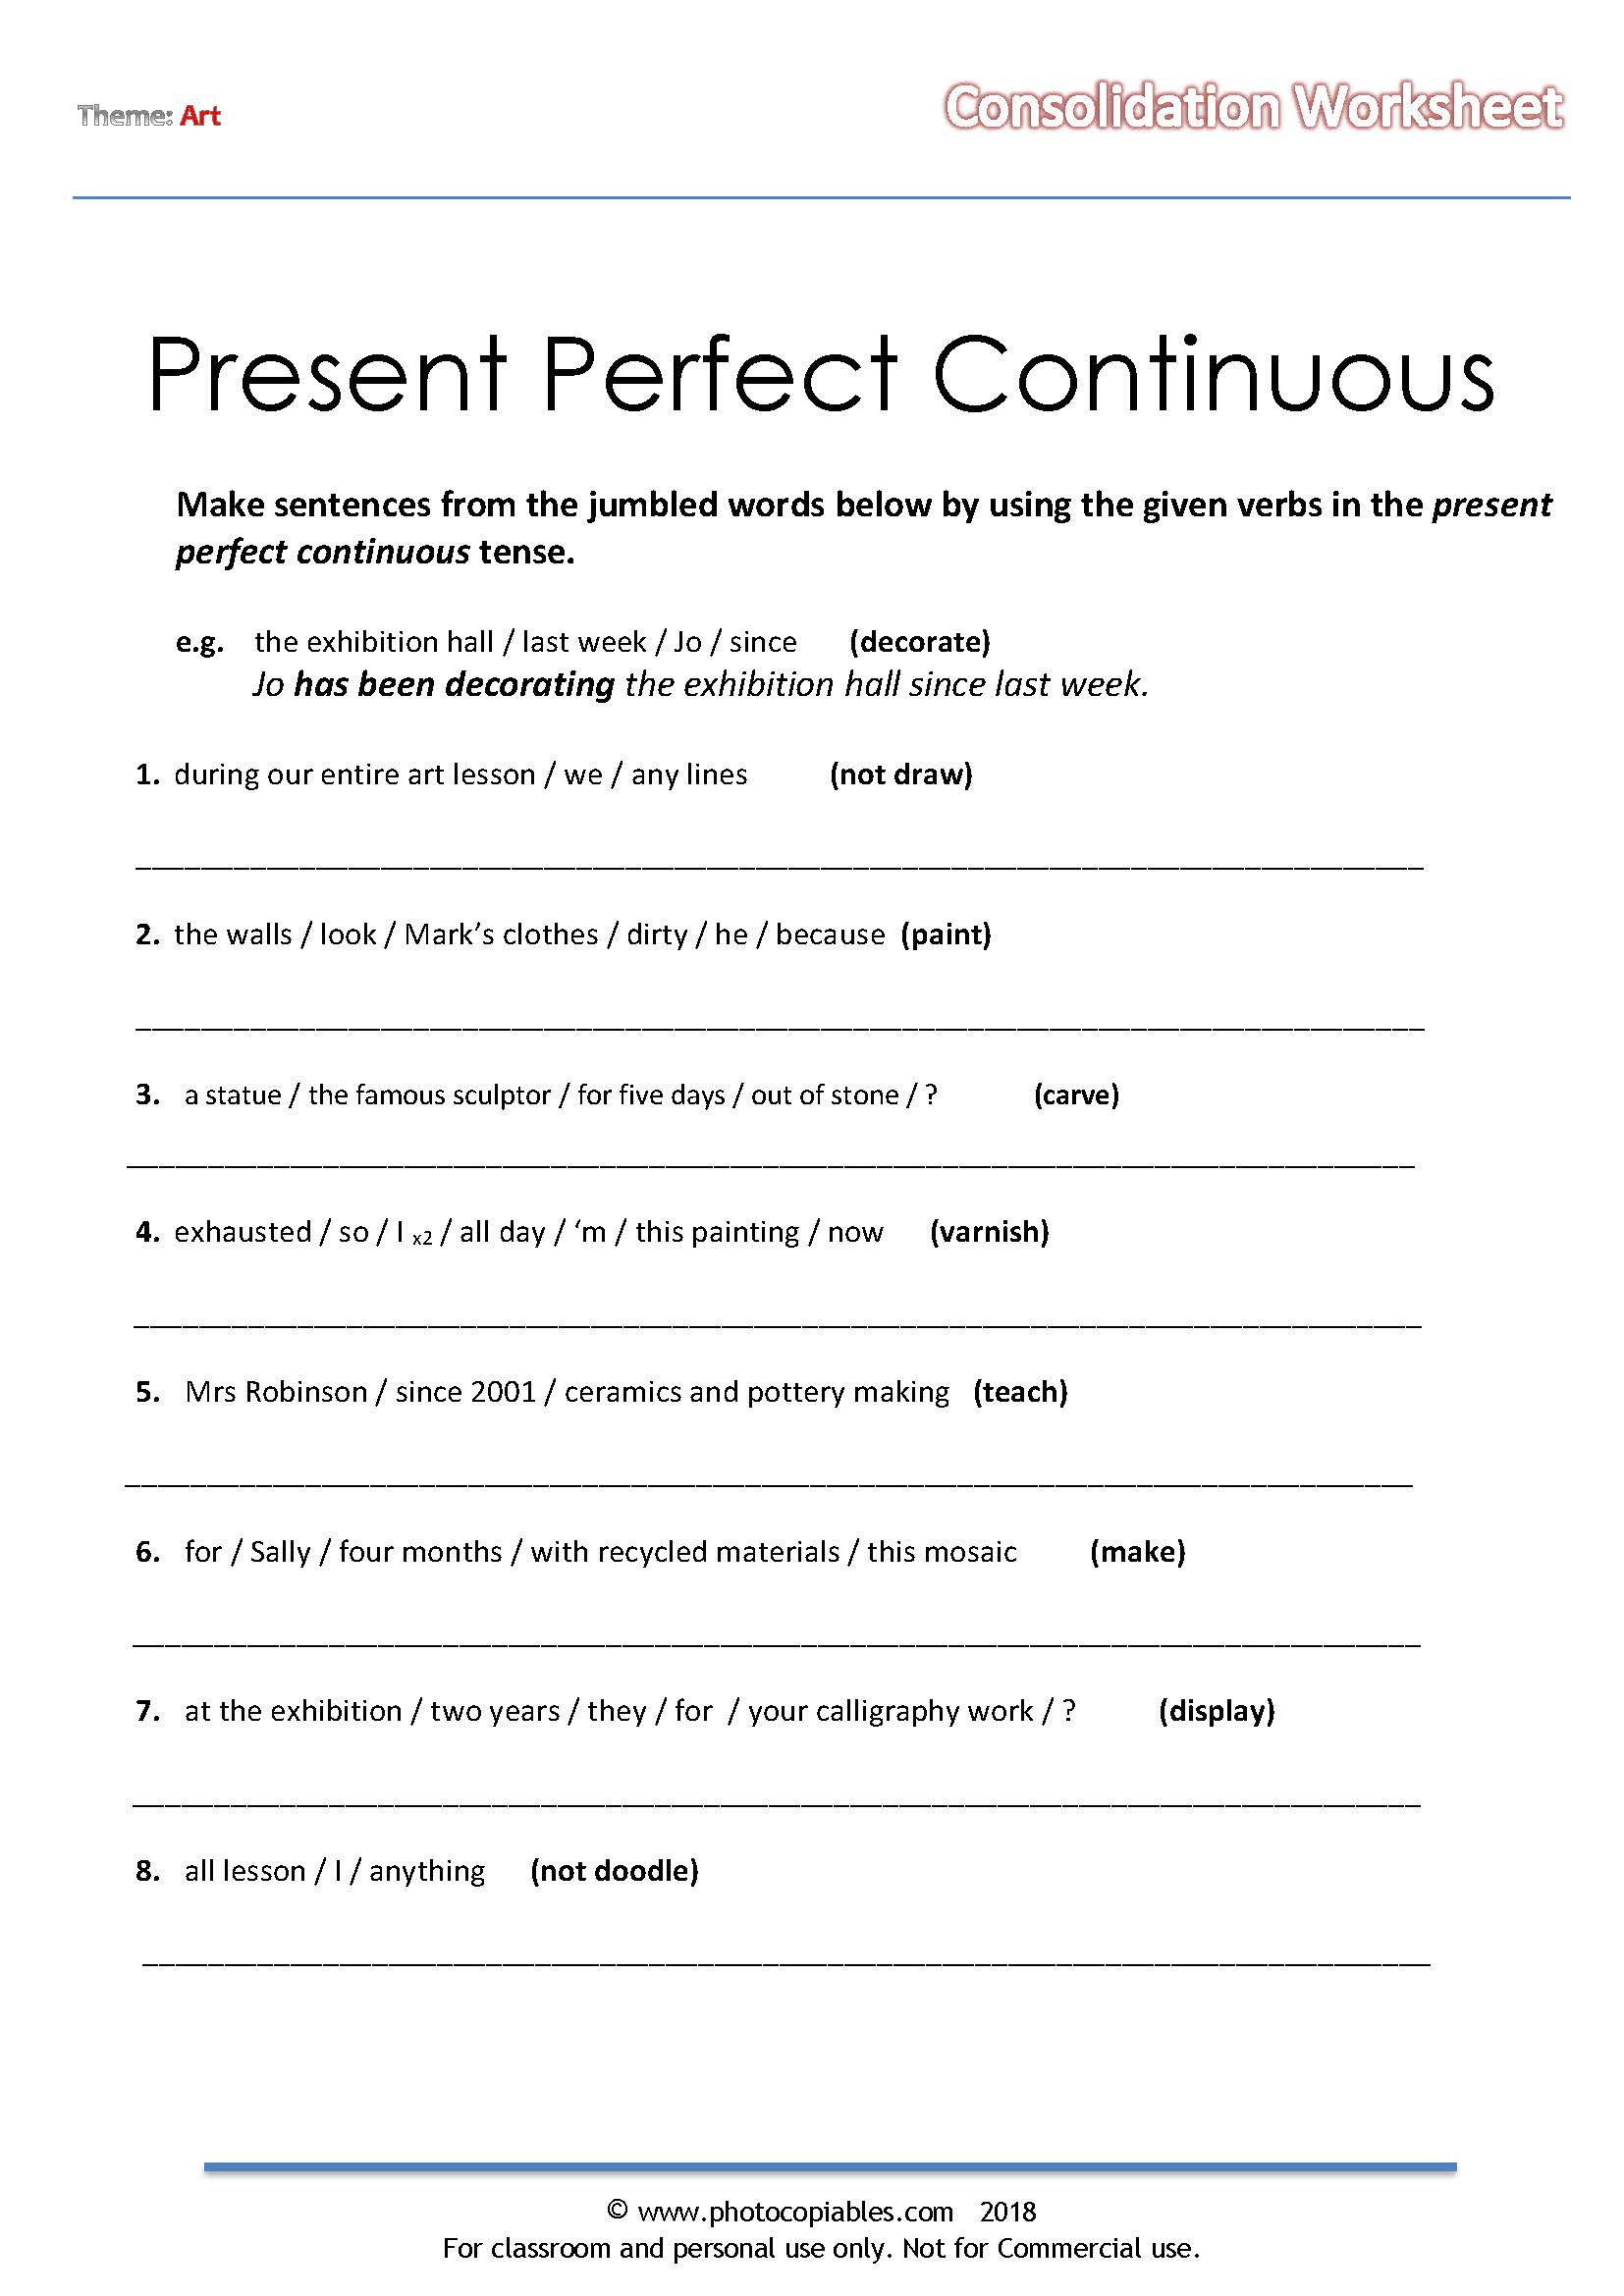 future-continuous-tense-worksheet-with-answers-in-2021-tenses-simple-present-tense-simple